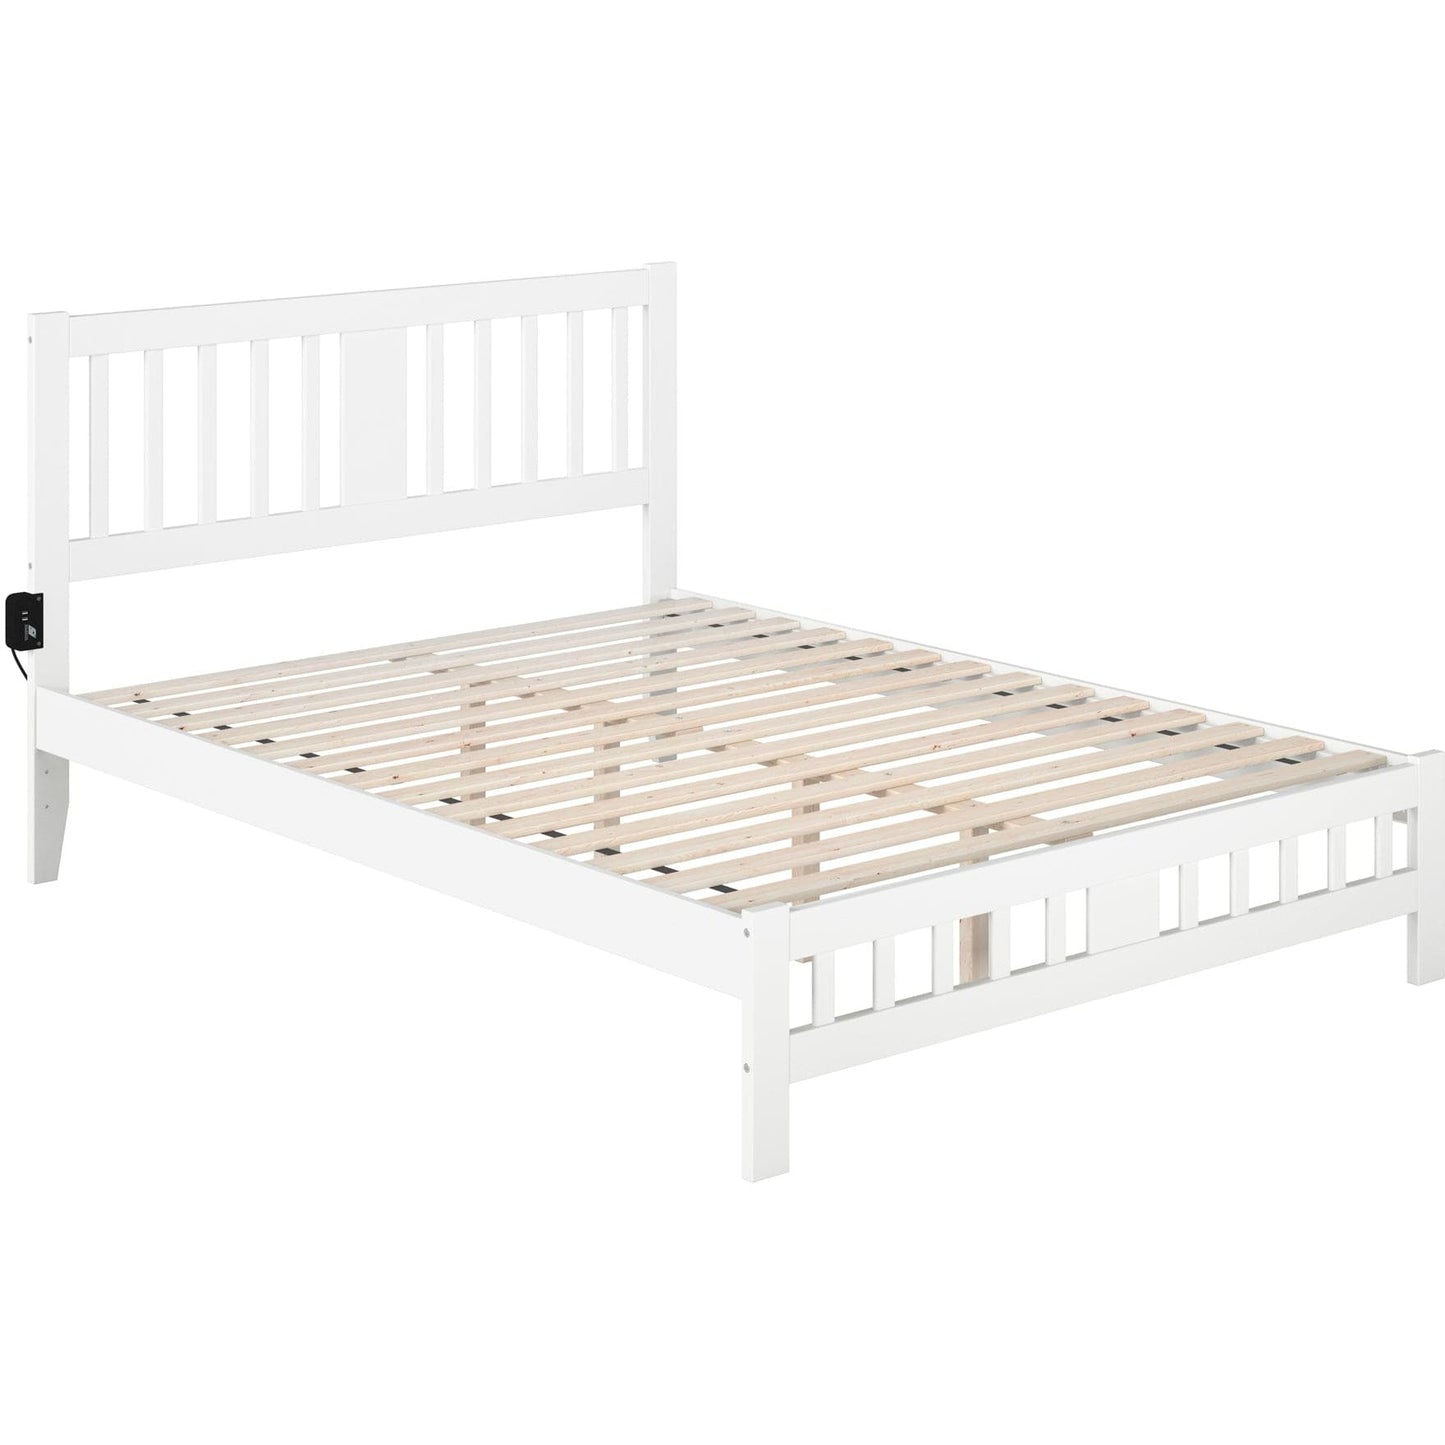 AFI Furnishings Tahoe Queen Bed with Footboard in White AG8960042